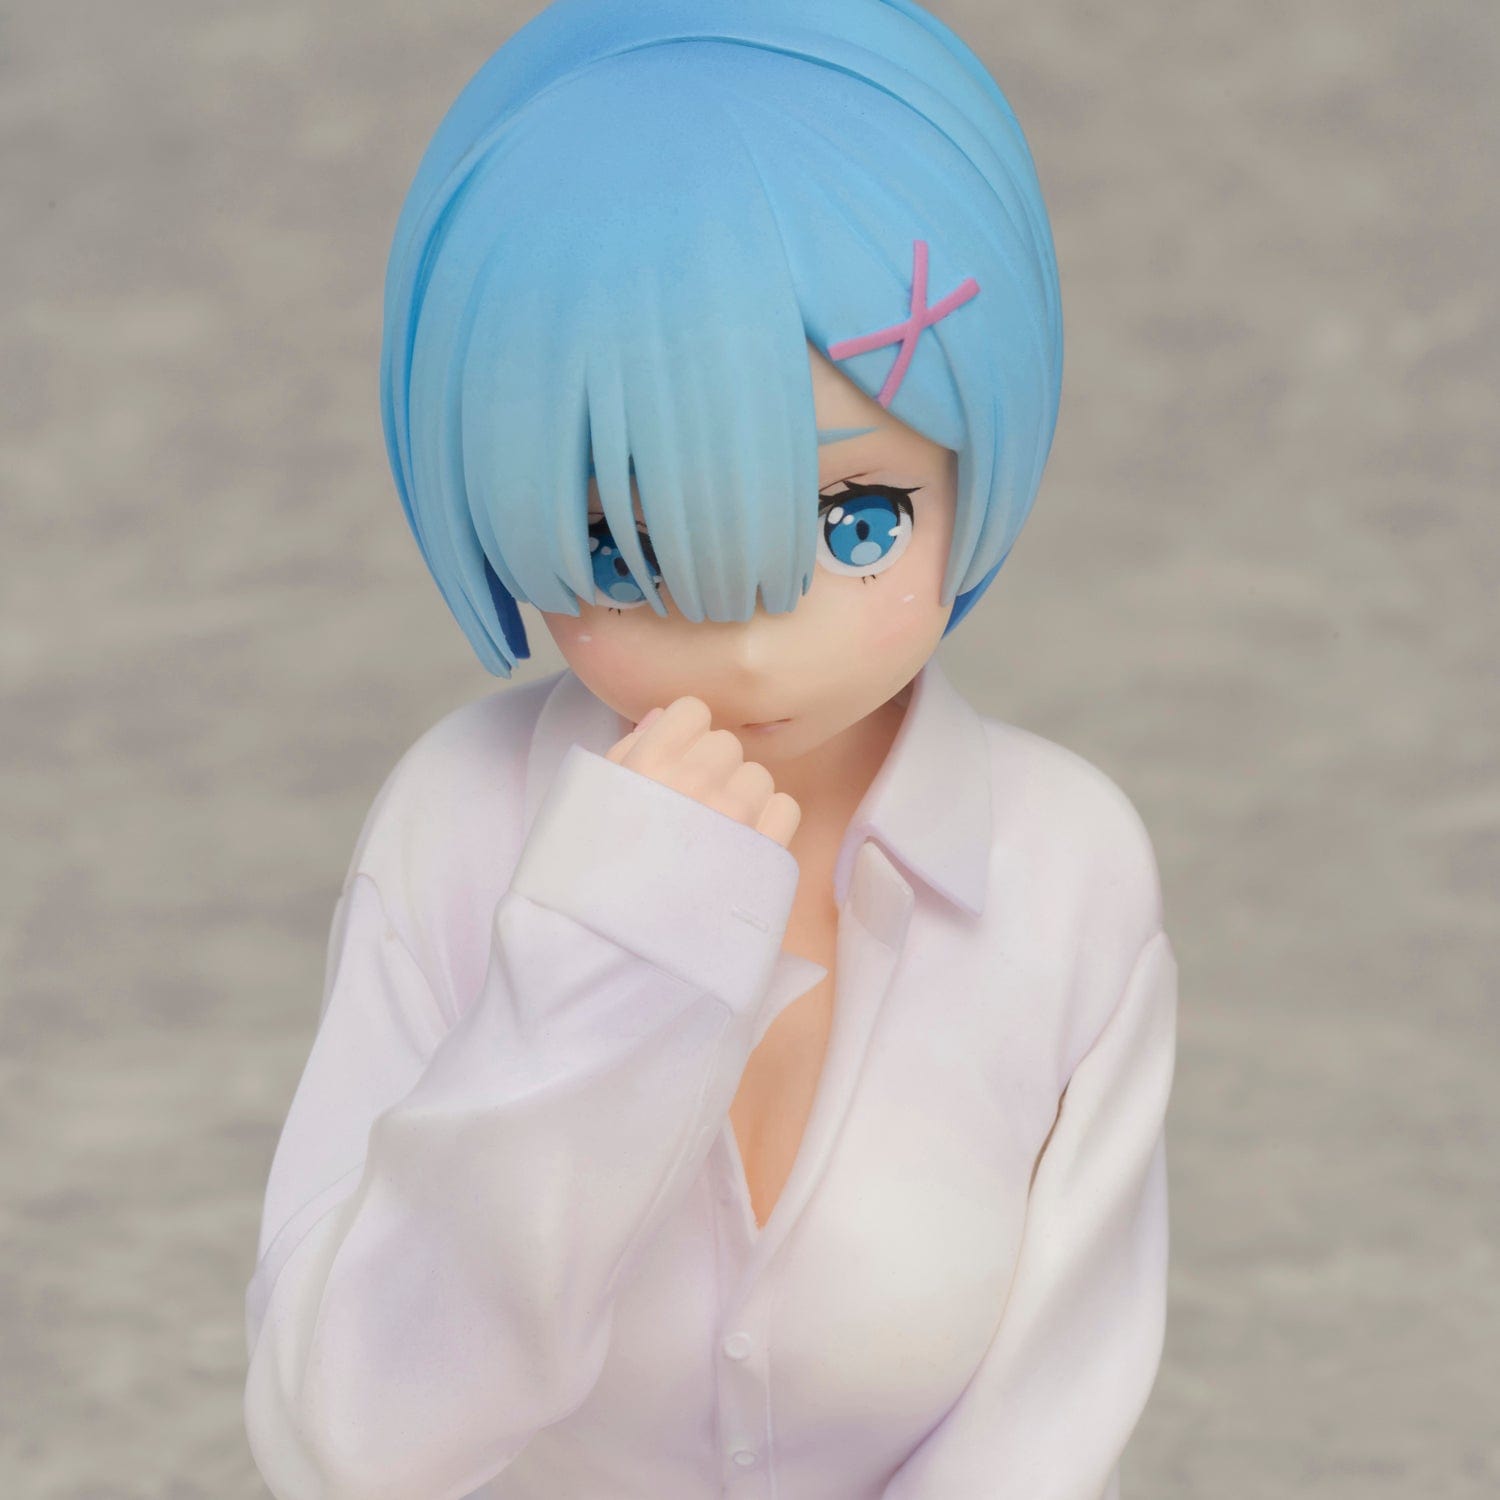 Union Creative Re:Zero - Starting Life in Another World - Rem Y Shirt - 1/6th Scale Figure